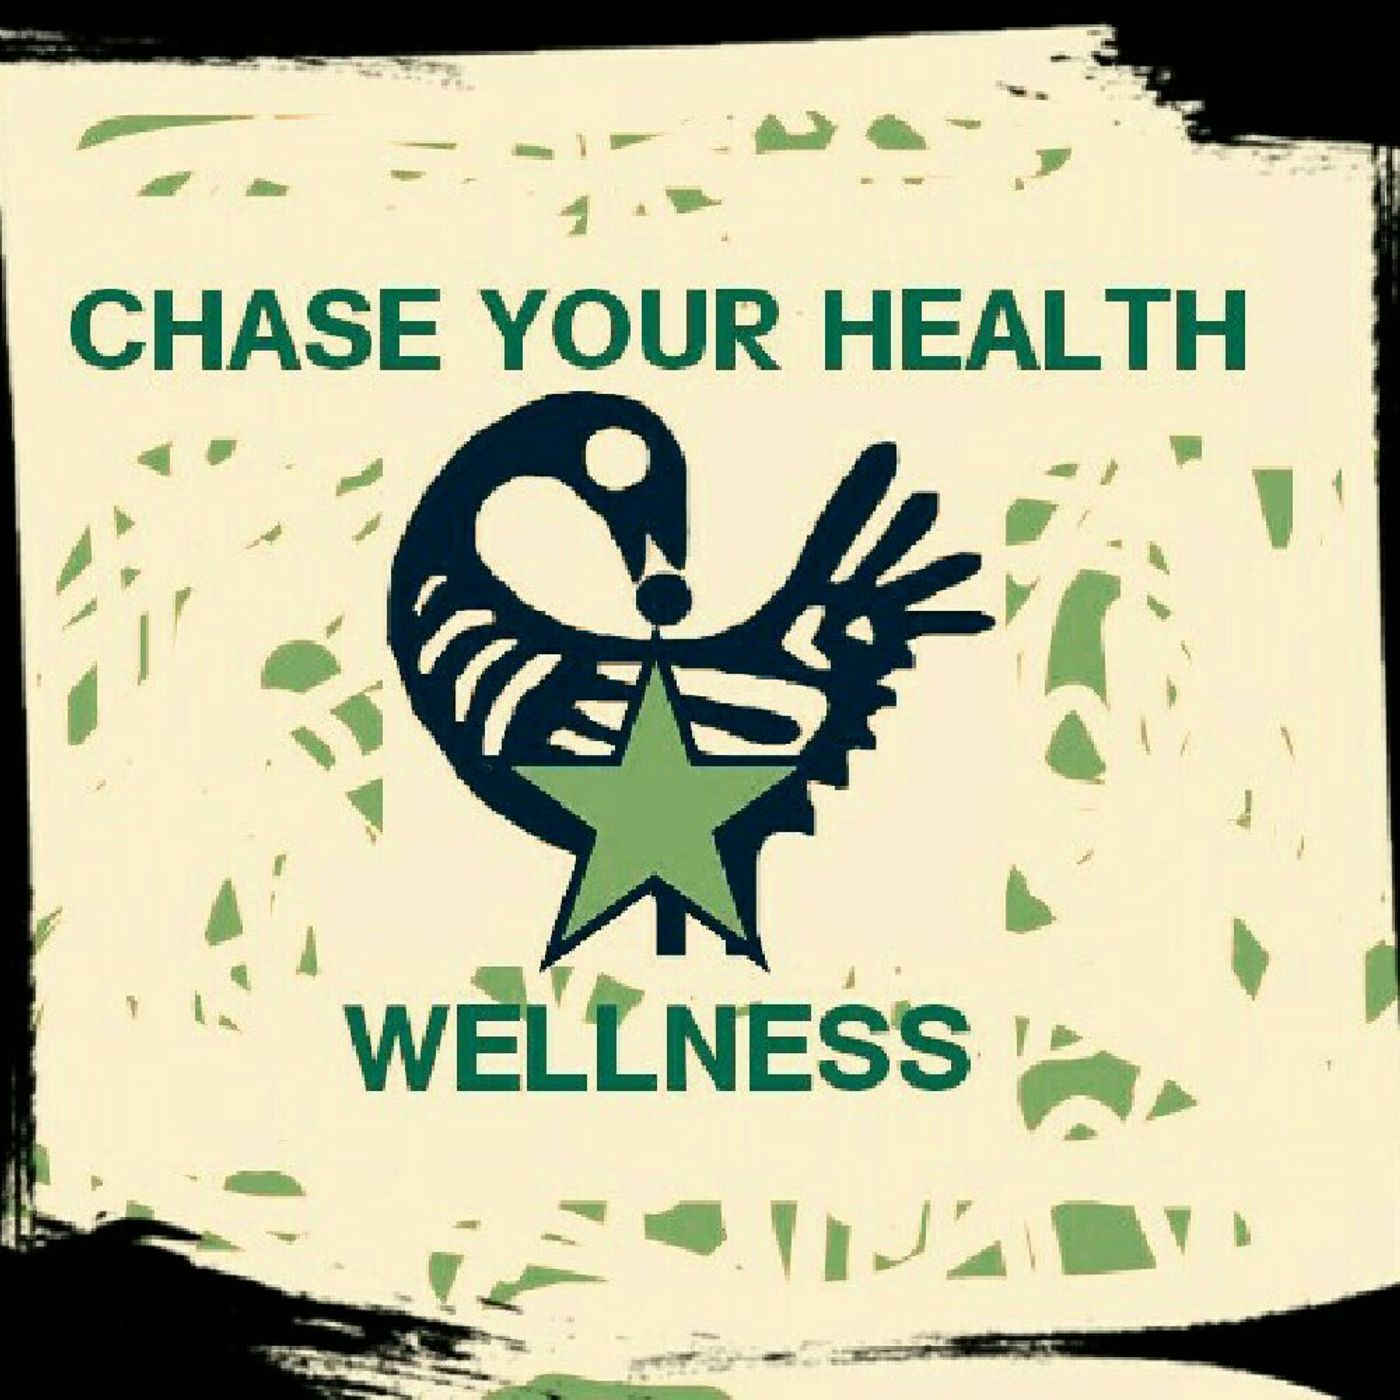 "Chase Your Health"